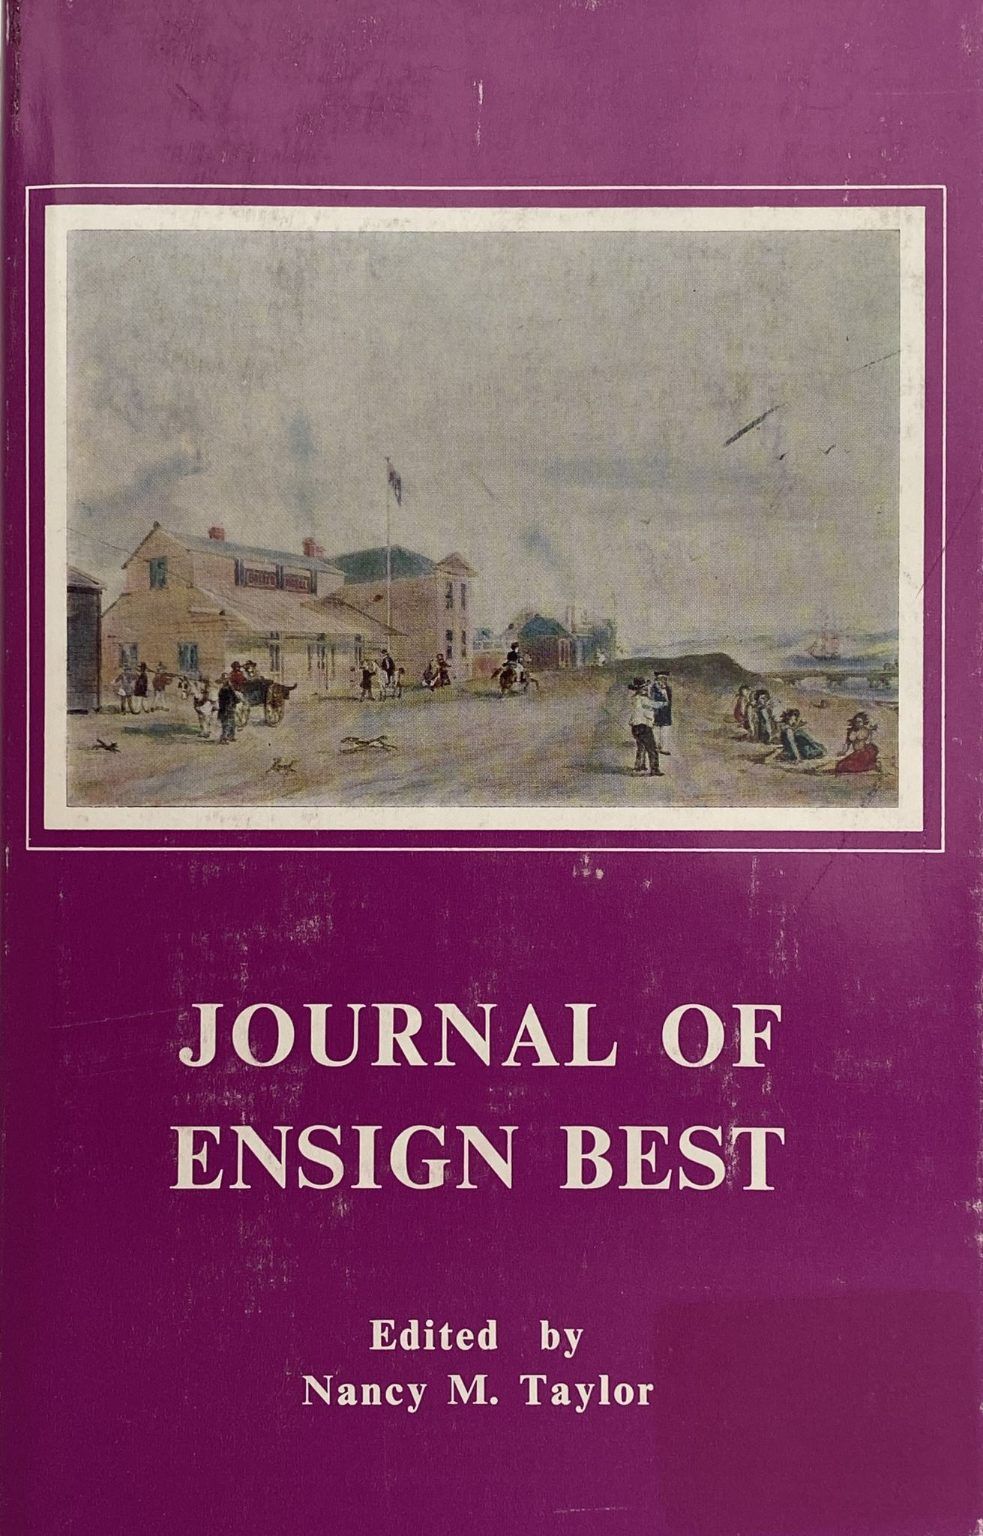 THE JOURNAL OF ENSIGN BEST 1837-1843